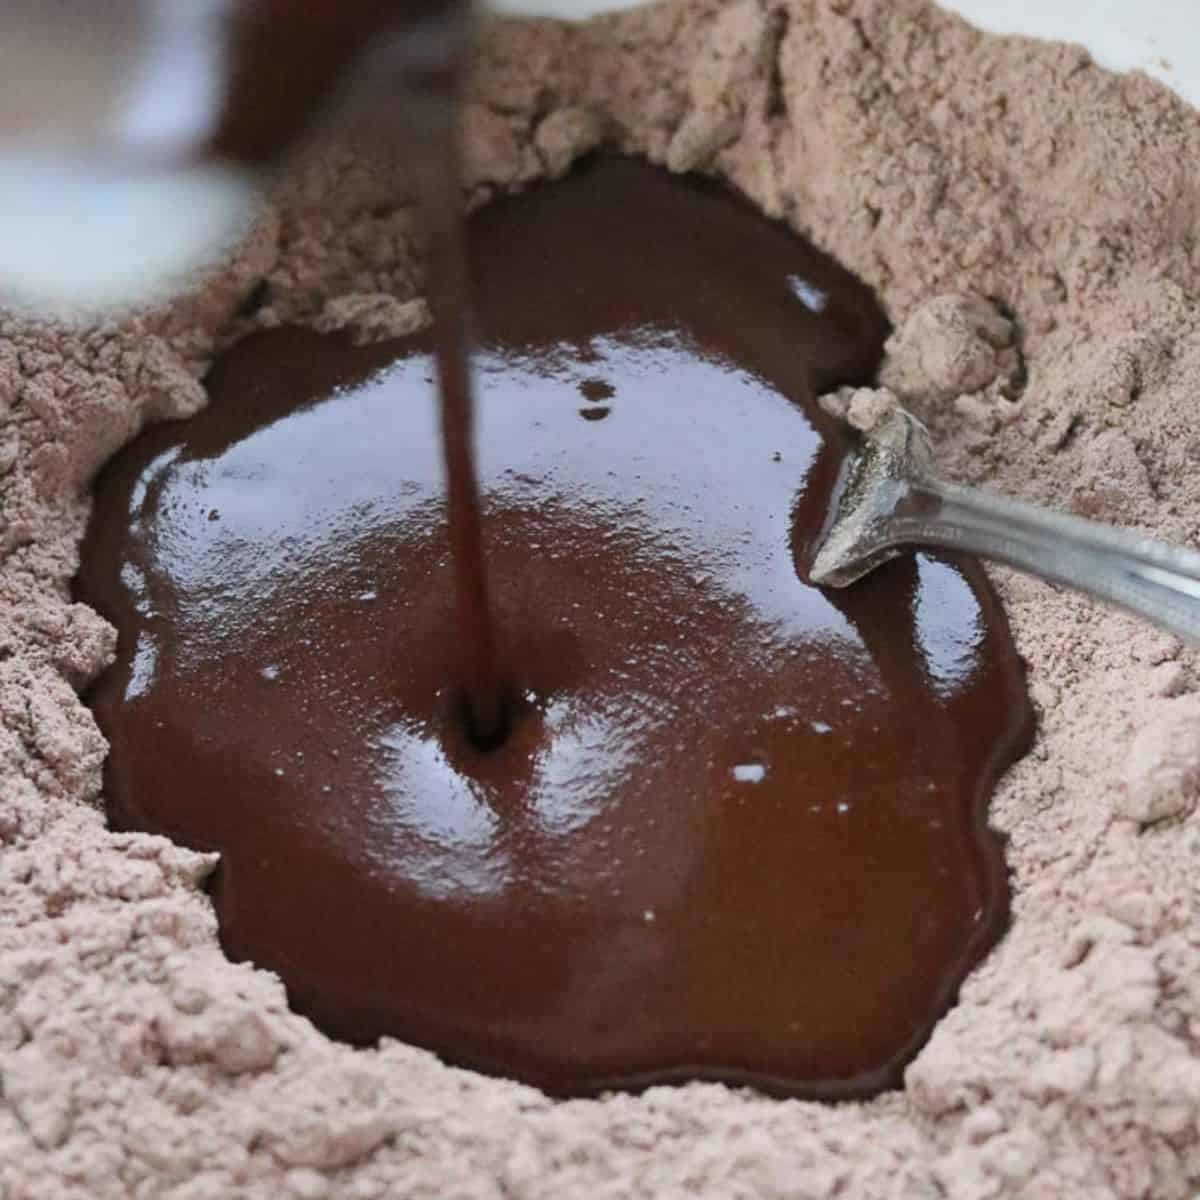 Adding melted chocolate to brownie batter.